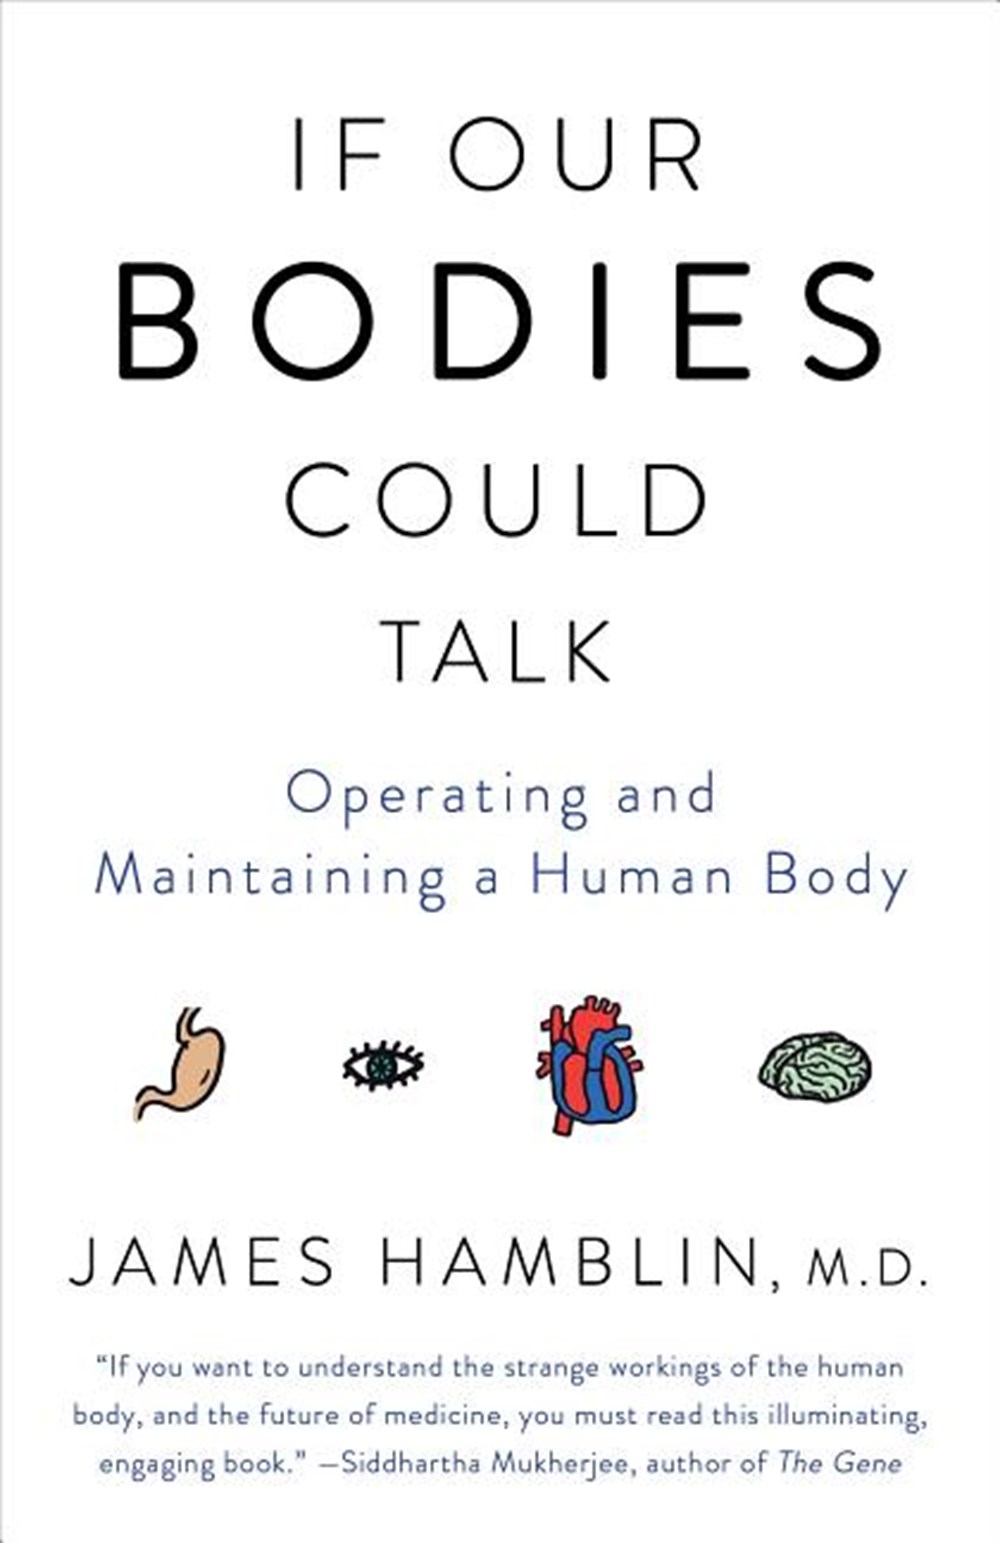 If Our Bodies Could Talk: Operating and Maintaining a Human Body